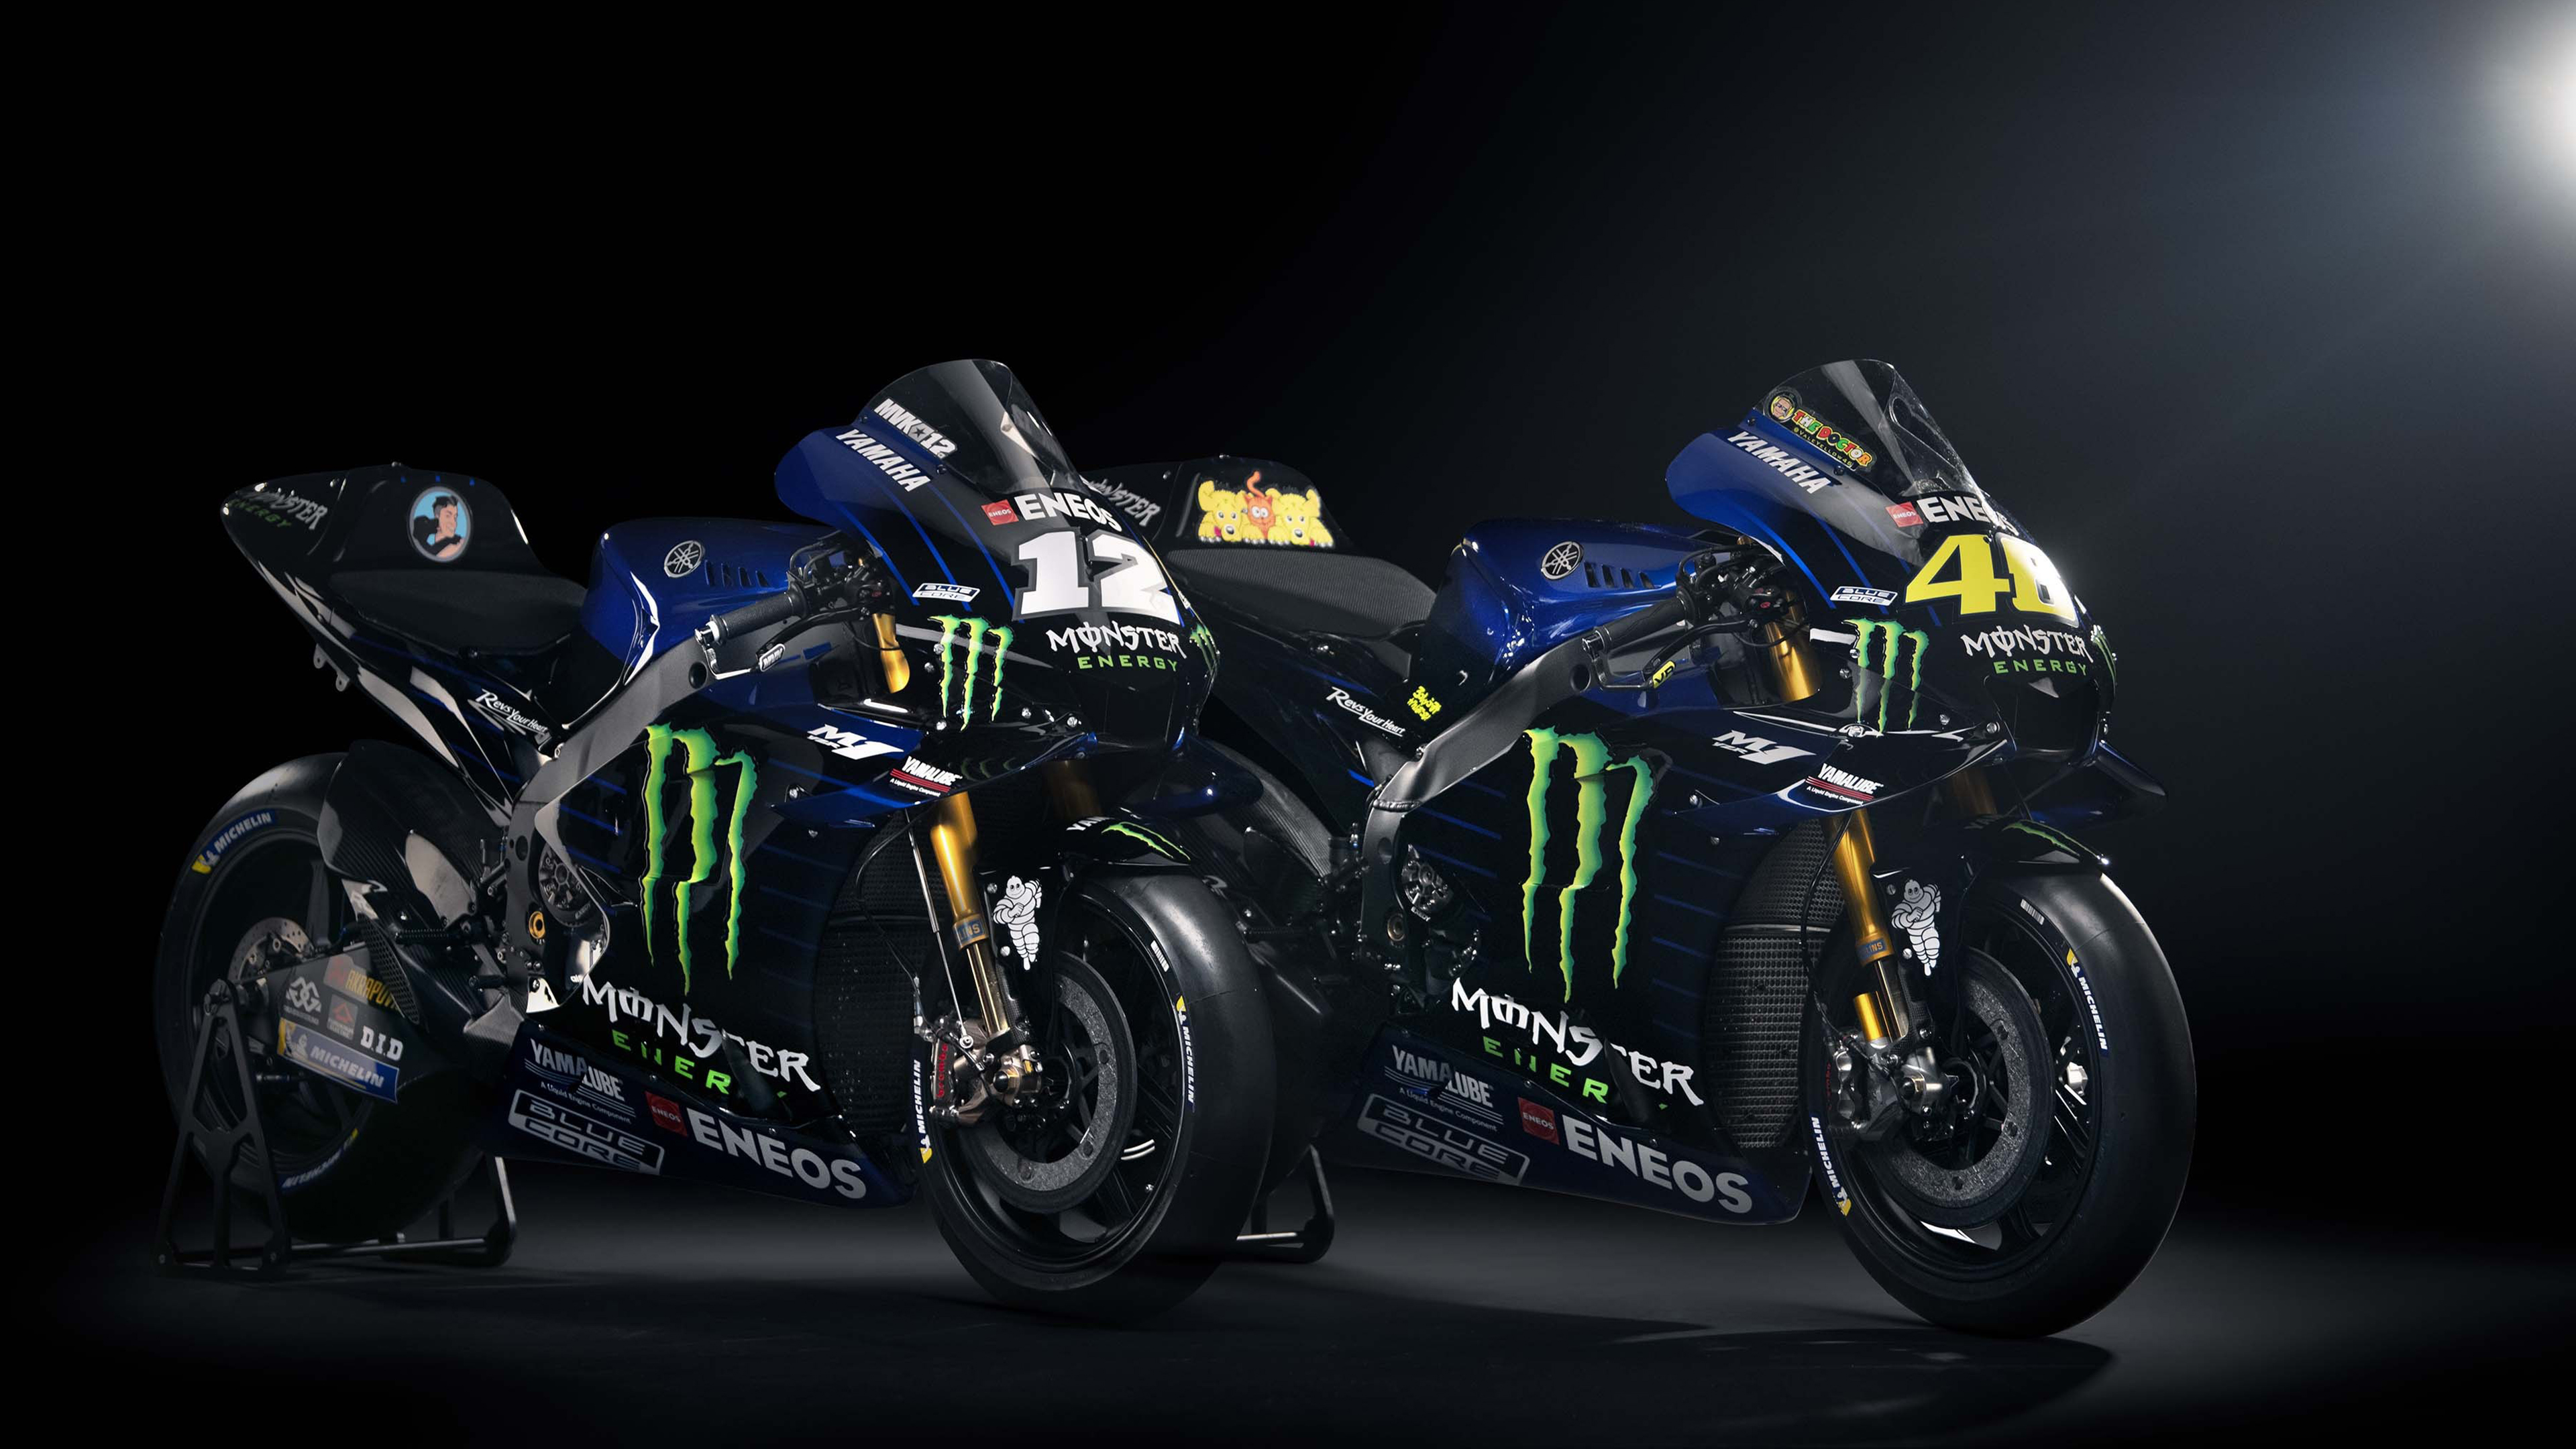 2019 Monster Yamaha YZR-M1 MotoGP 4K HD Wallpapers. Download 2019 Monster Yamaha YZR-M1 MotoGP 4K desktop & mobile backgrounds, photos in HD, 4K high quality resolutions from category Bikes & Motorcycles with ID #27510." />